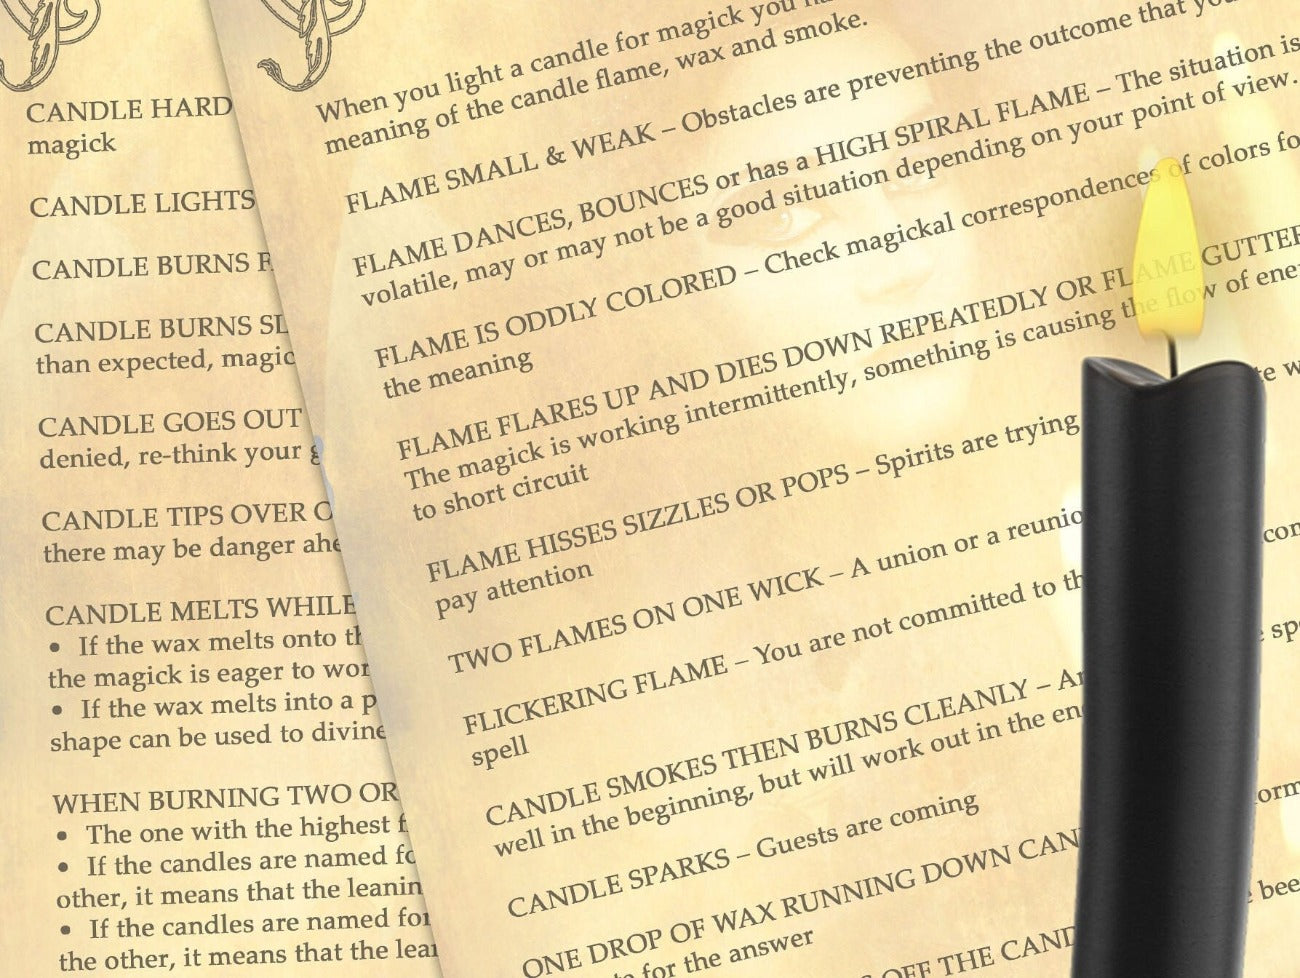 CANDLE FLAME DIVINATION 2 Pages, close up view of the pages - Morgana Magick Spell